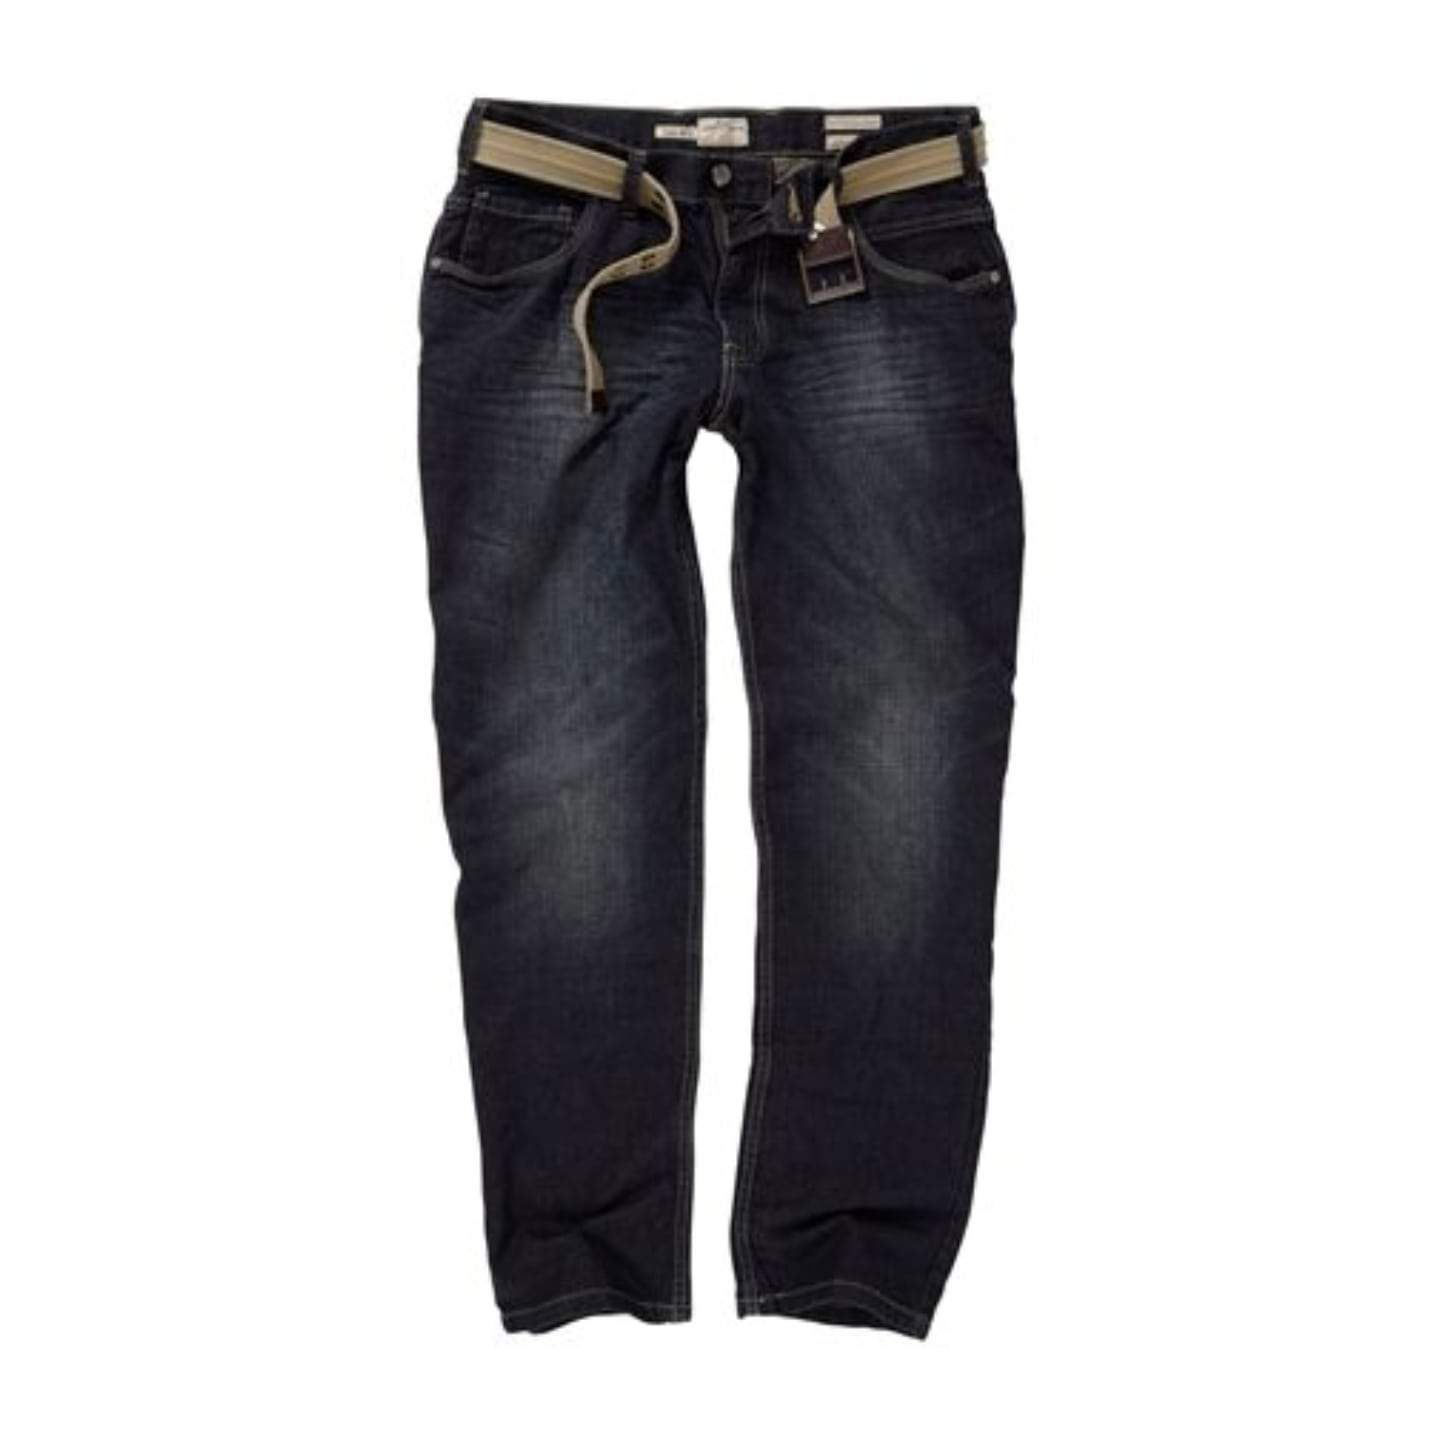 Next Mens Dark Wash Bootcut Jeans with Belt - Stockpoint Apparel Outlet